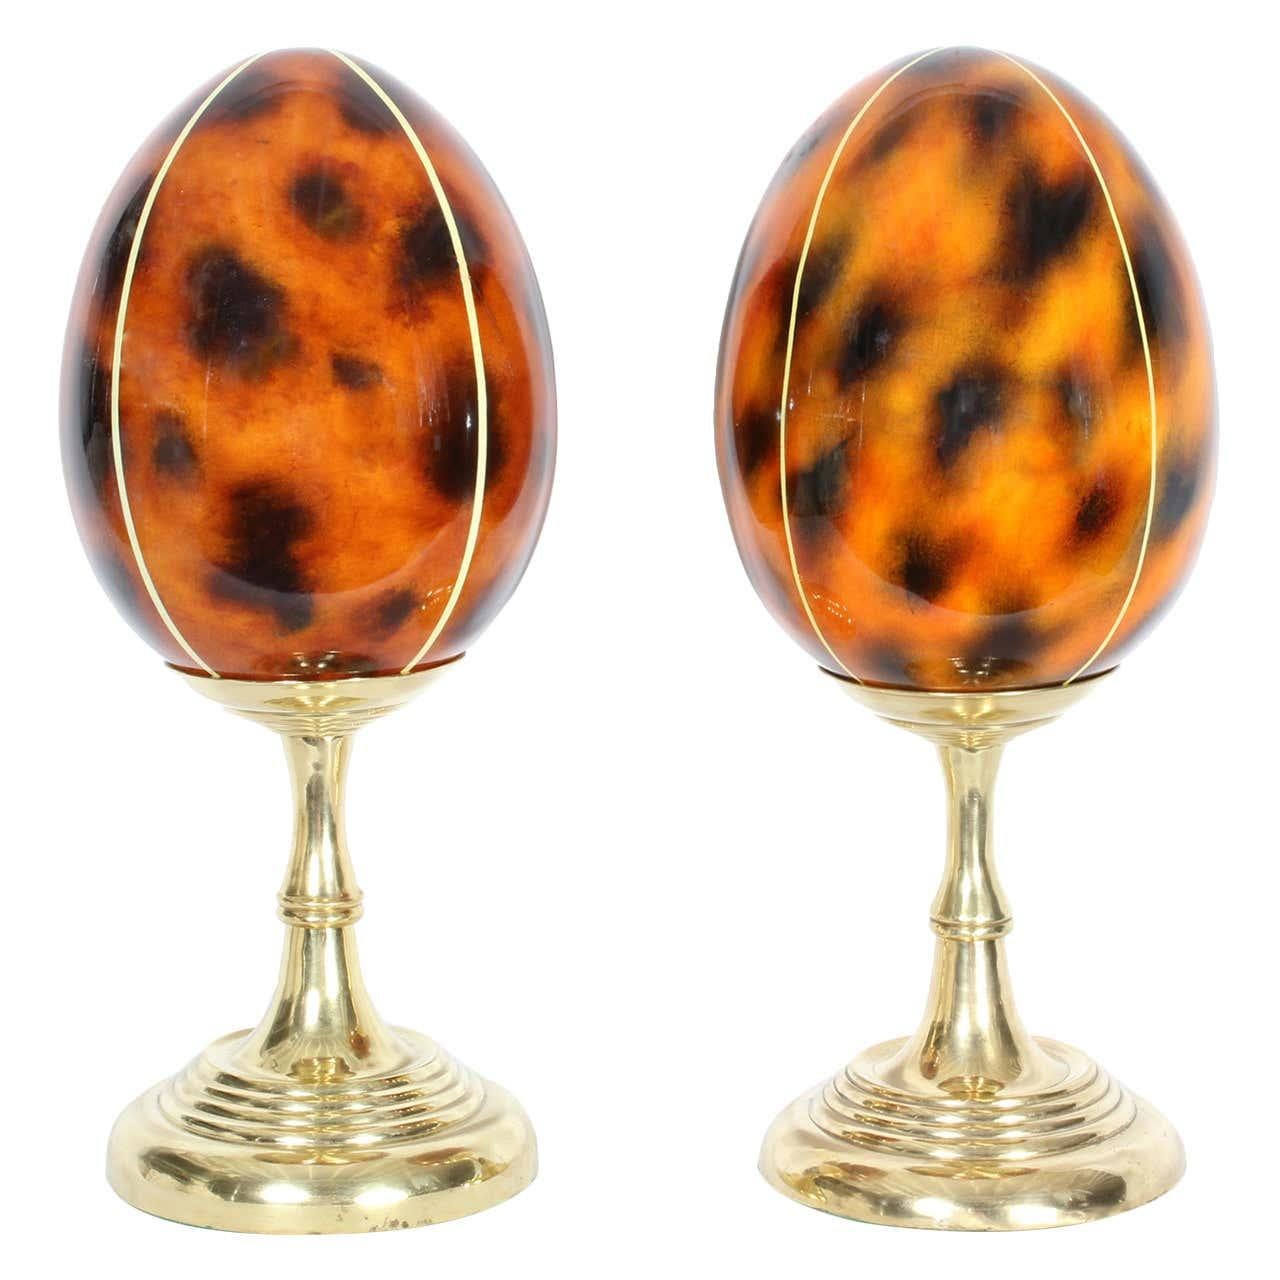 A pair of faux tortoise lacquered egg shaped objects de arte on solid brass turned pedestals, with a candlestick vibe. No home is complete without them.
Possibly by Maitland - Smith. Newly polished.

 